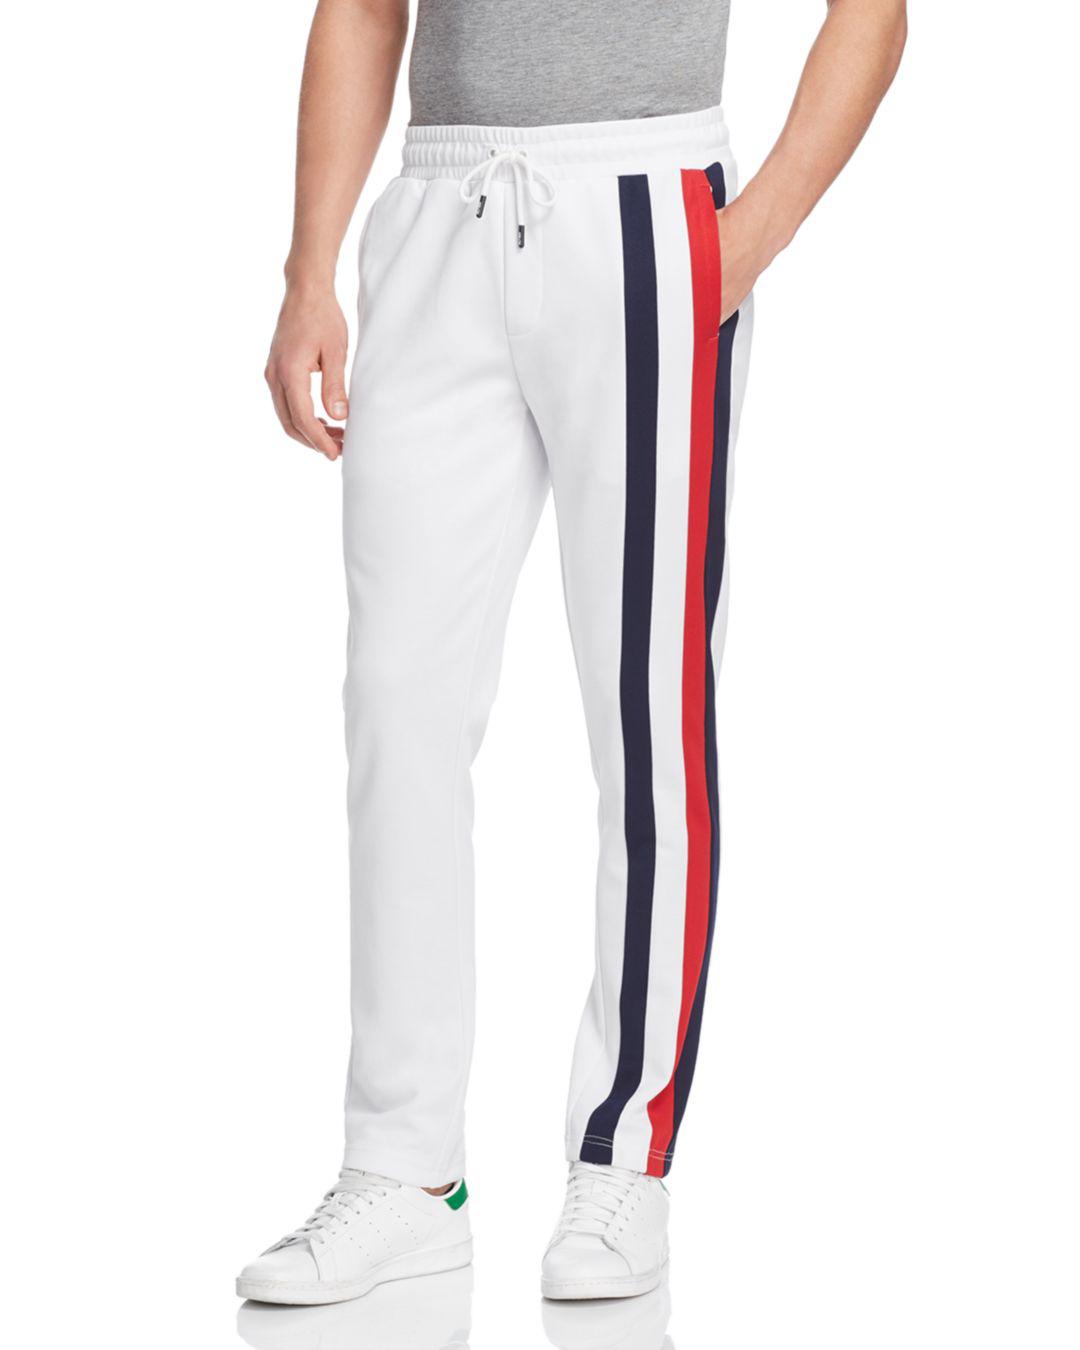 Tommy Hilfiger Sporty Tech Jogger Pants in Bright White (White) for Men -  Lyst